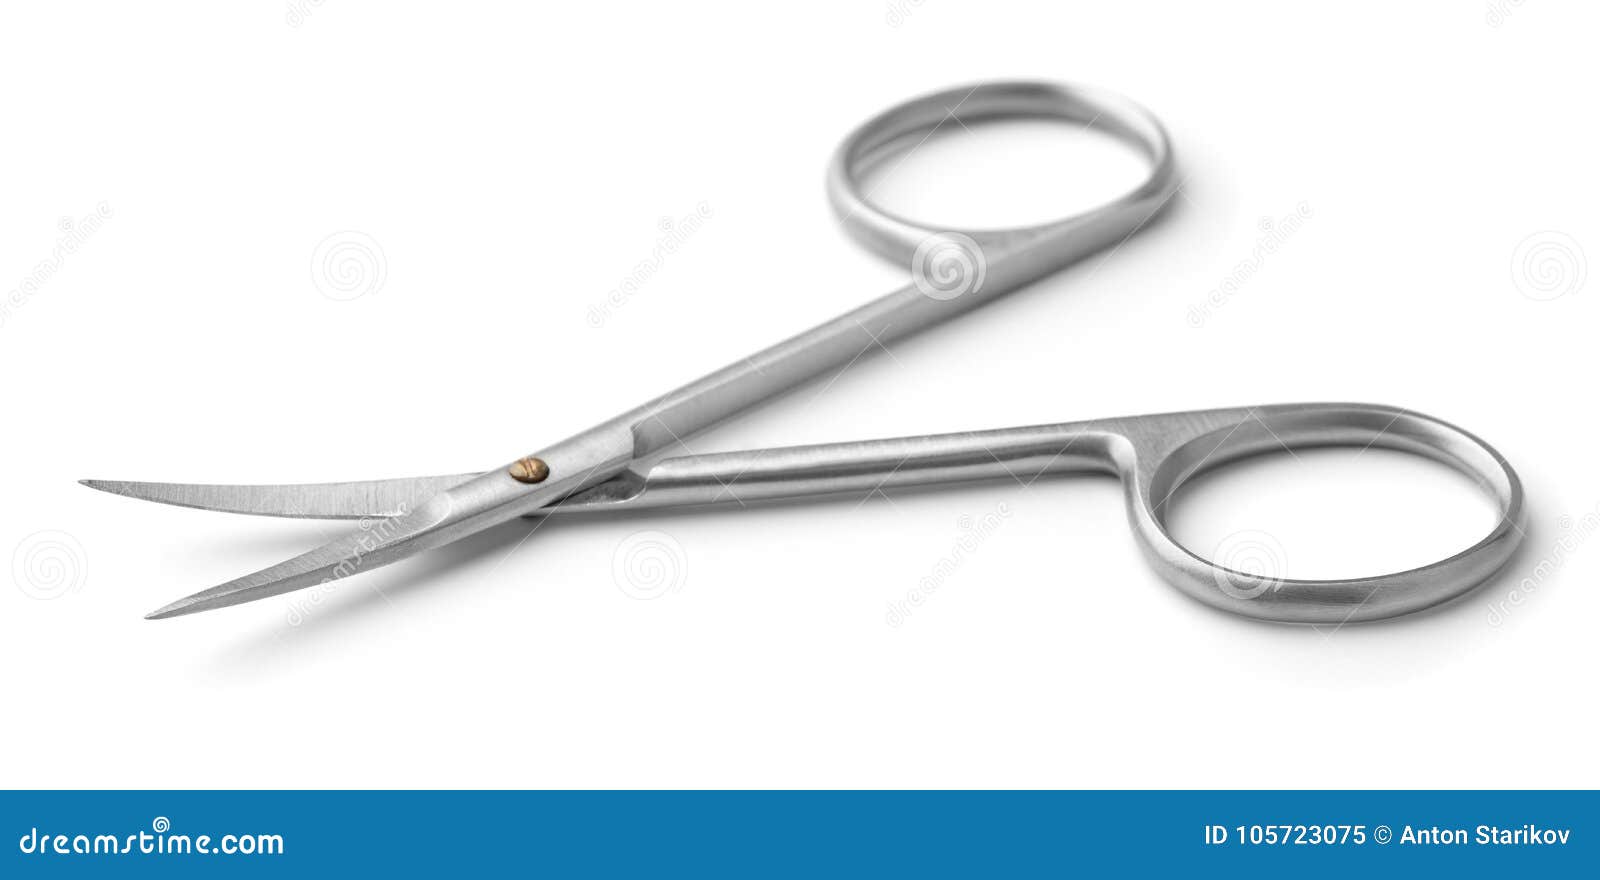 Stainless Steel Manicure Scissors Stock Image - Image of equipment ...